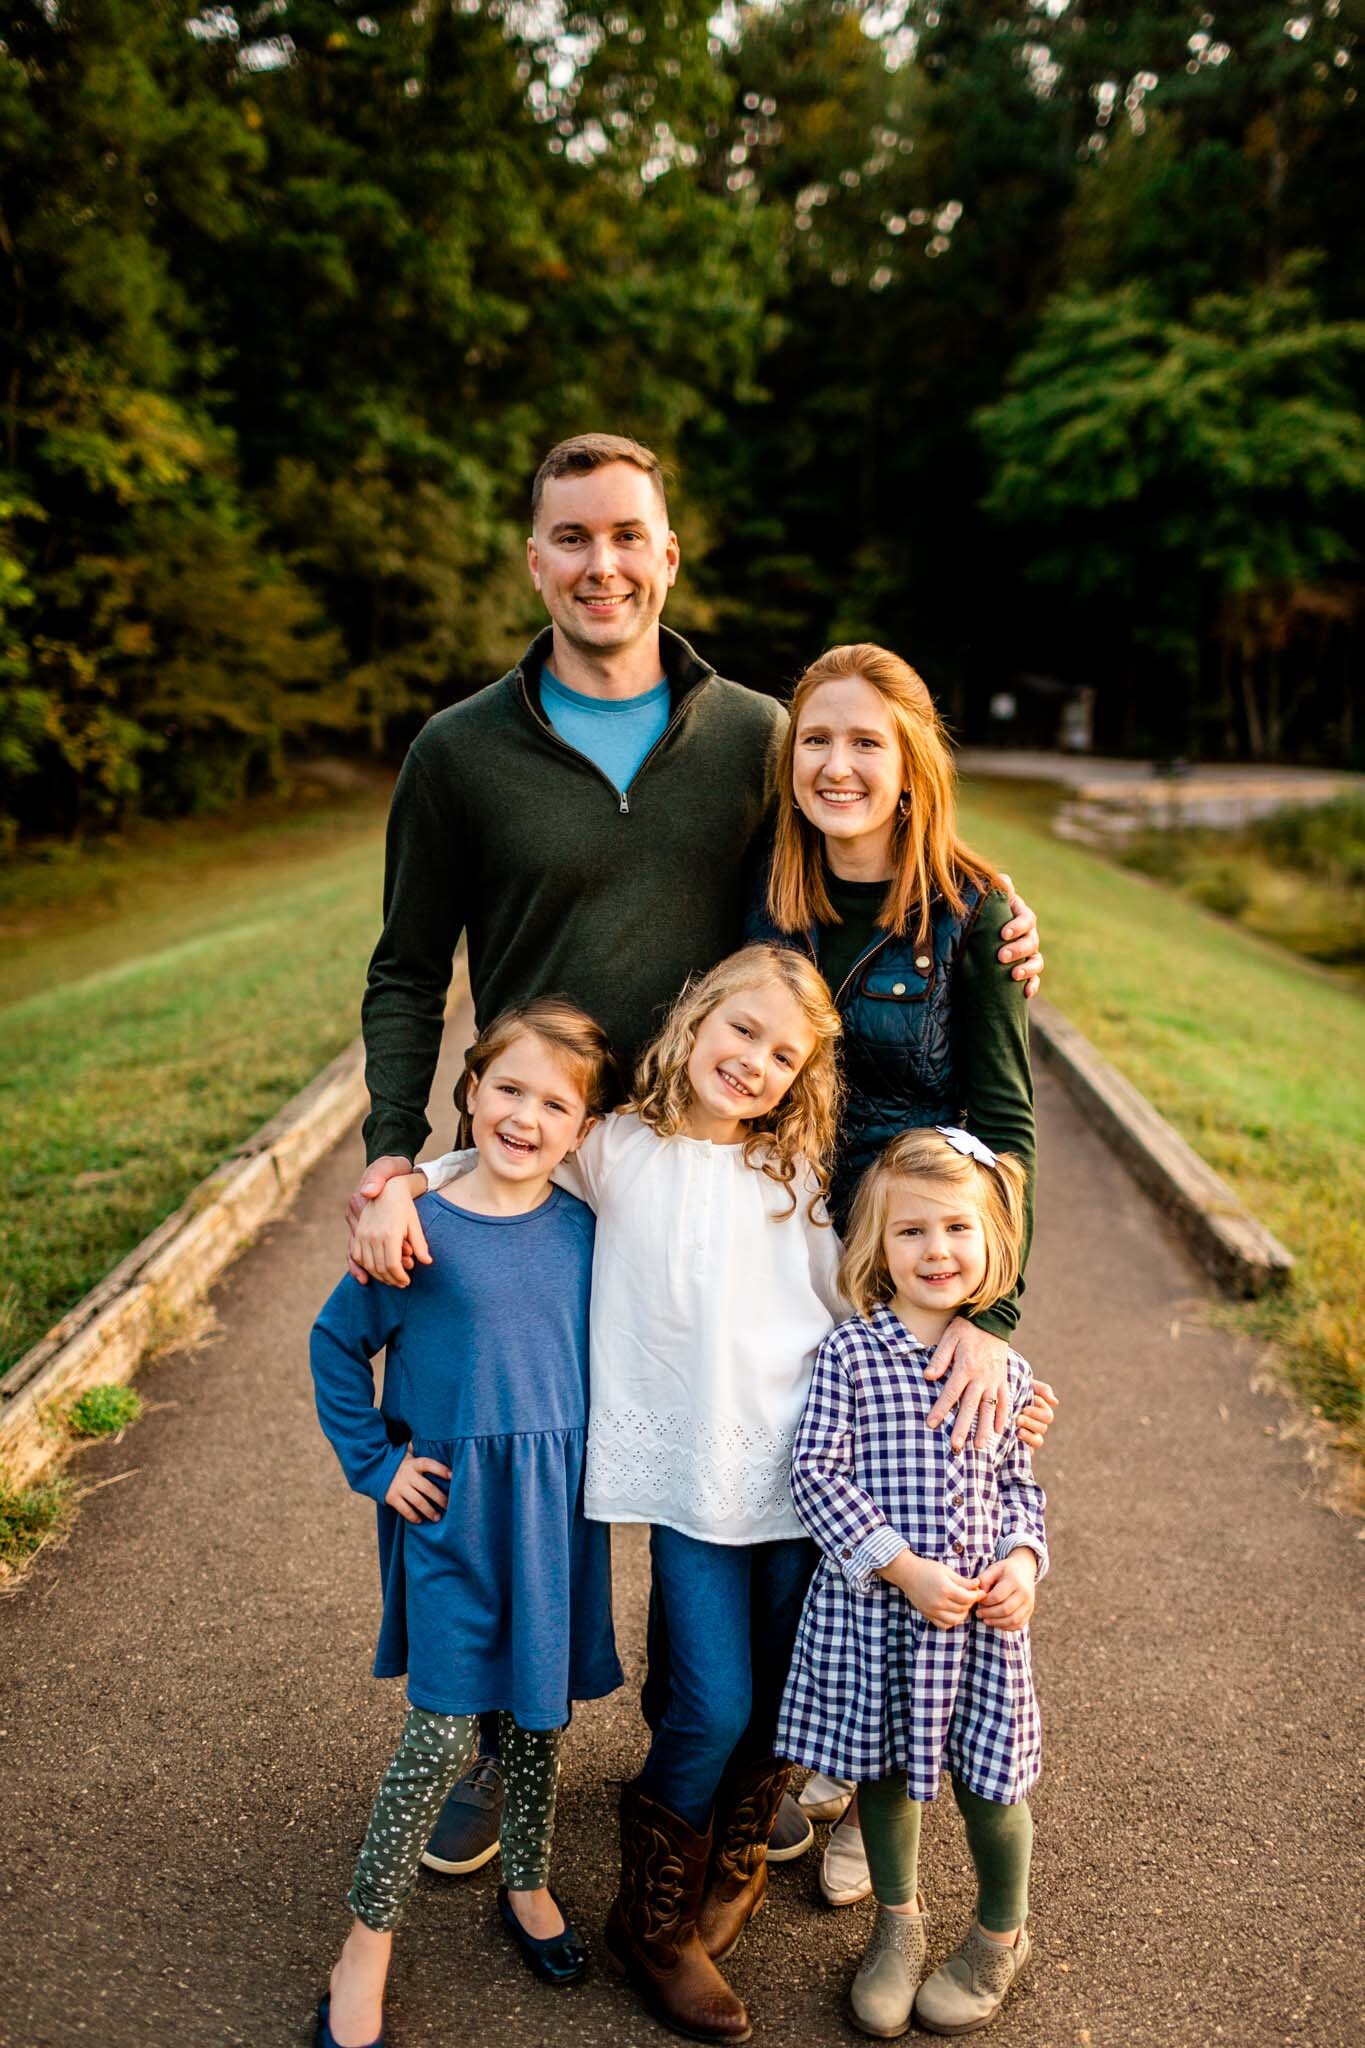 Raleigh Family Photographer | Umstead Park | By G. Lin Photography | Outdoor fall family photo